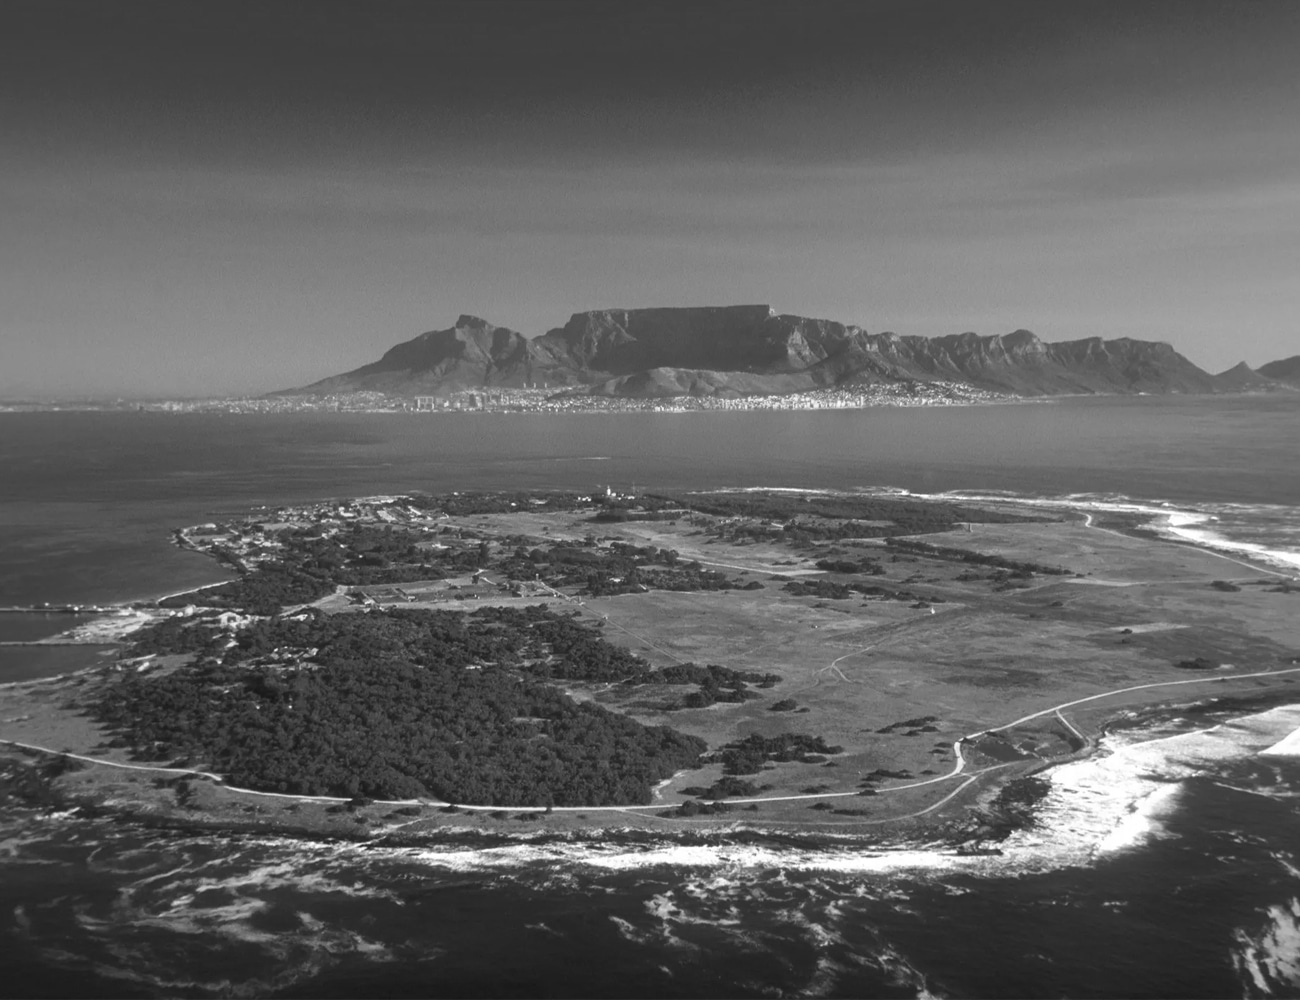 Robben Island in Cape Town